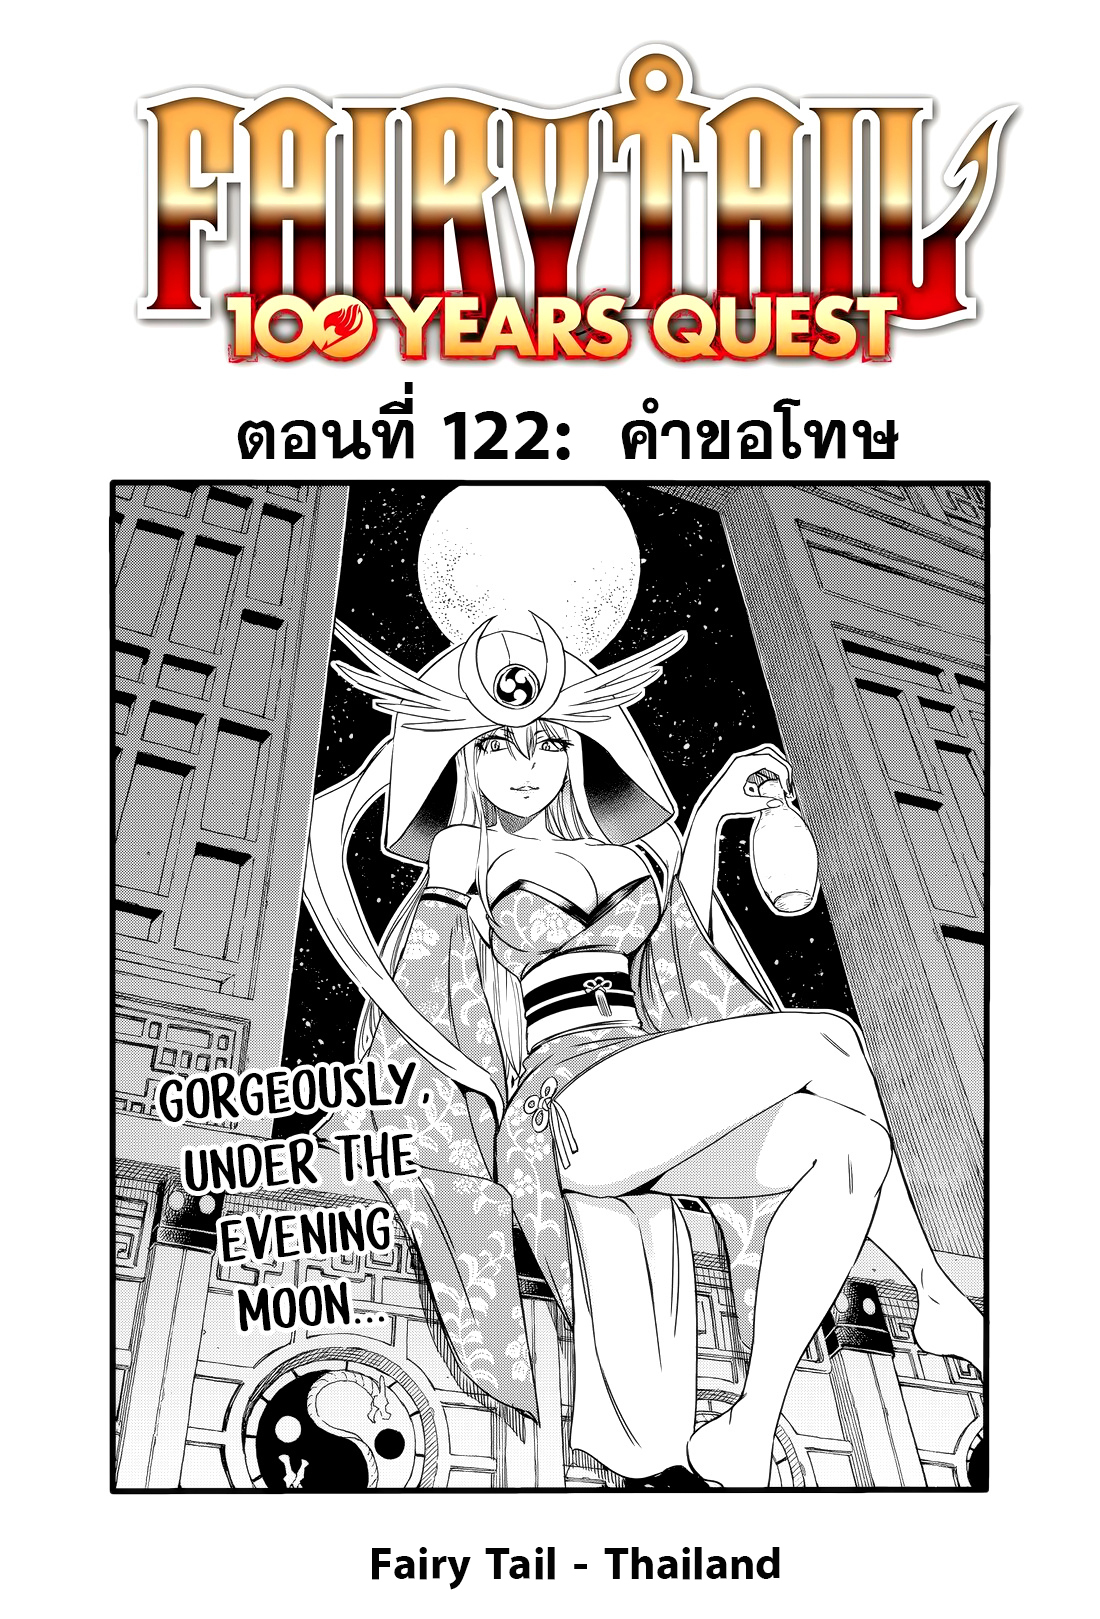 Fairy Tail 100 Years Quest 122 (1)